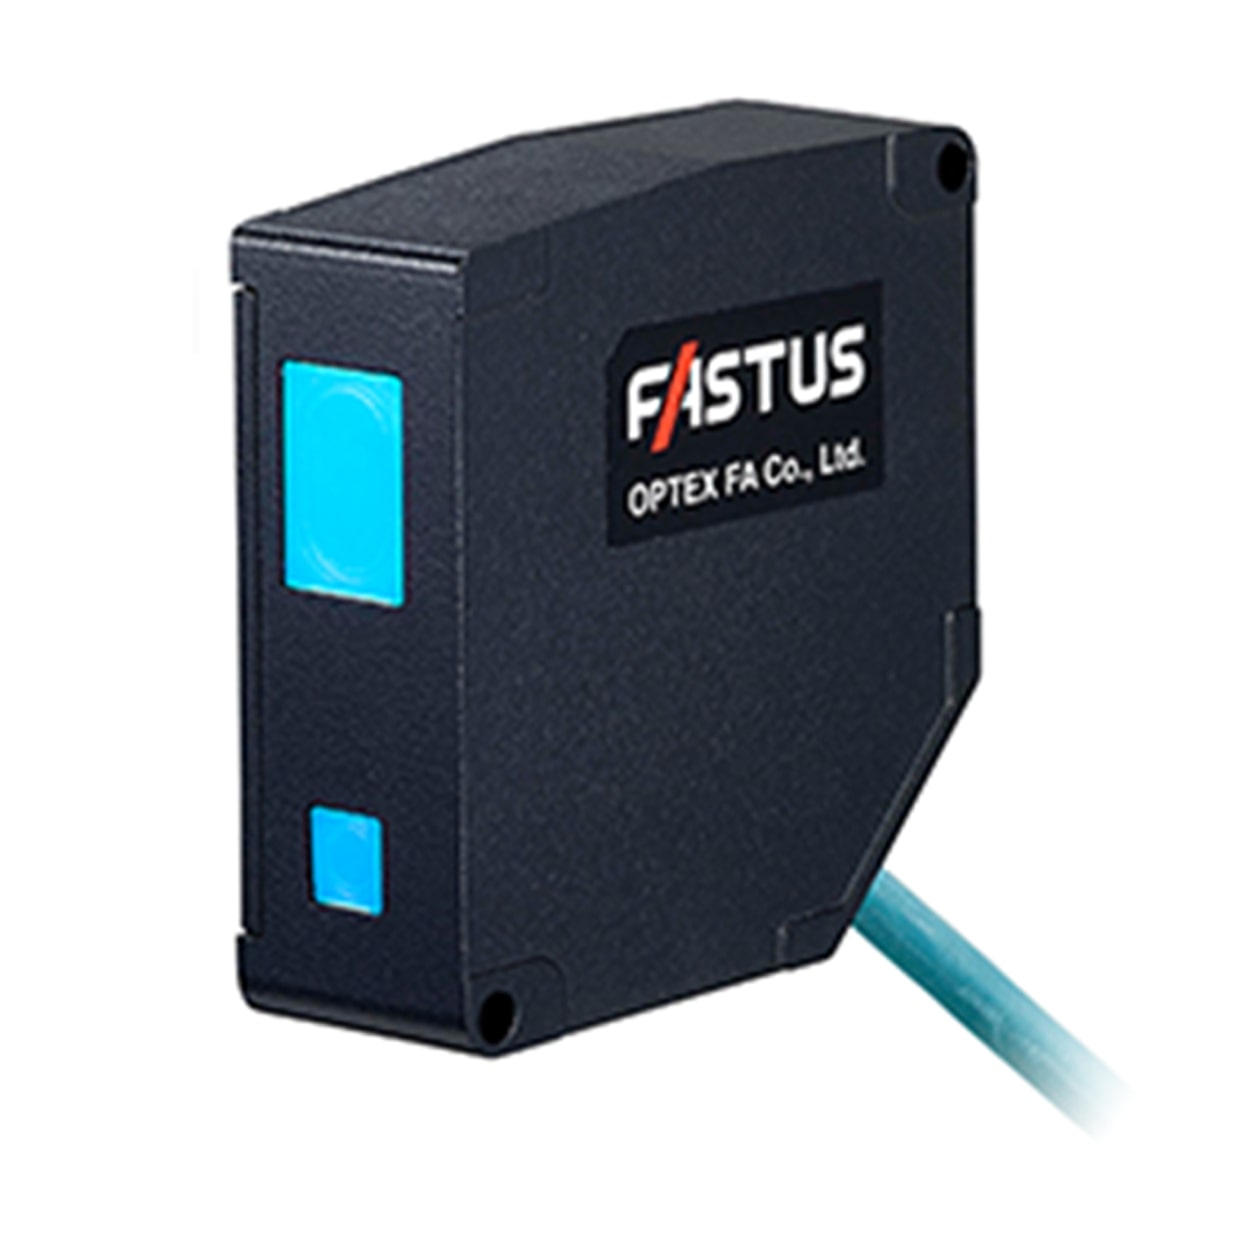 OPTEX FA CDX SERIES ULTRA HIGH-ACCURACY LASER DISPLACEMENT SENSORS